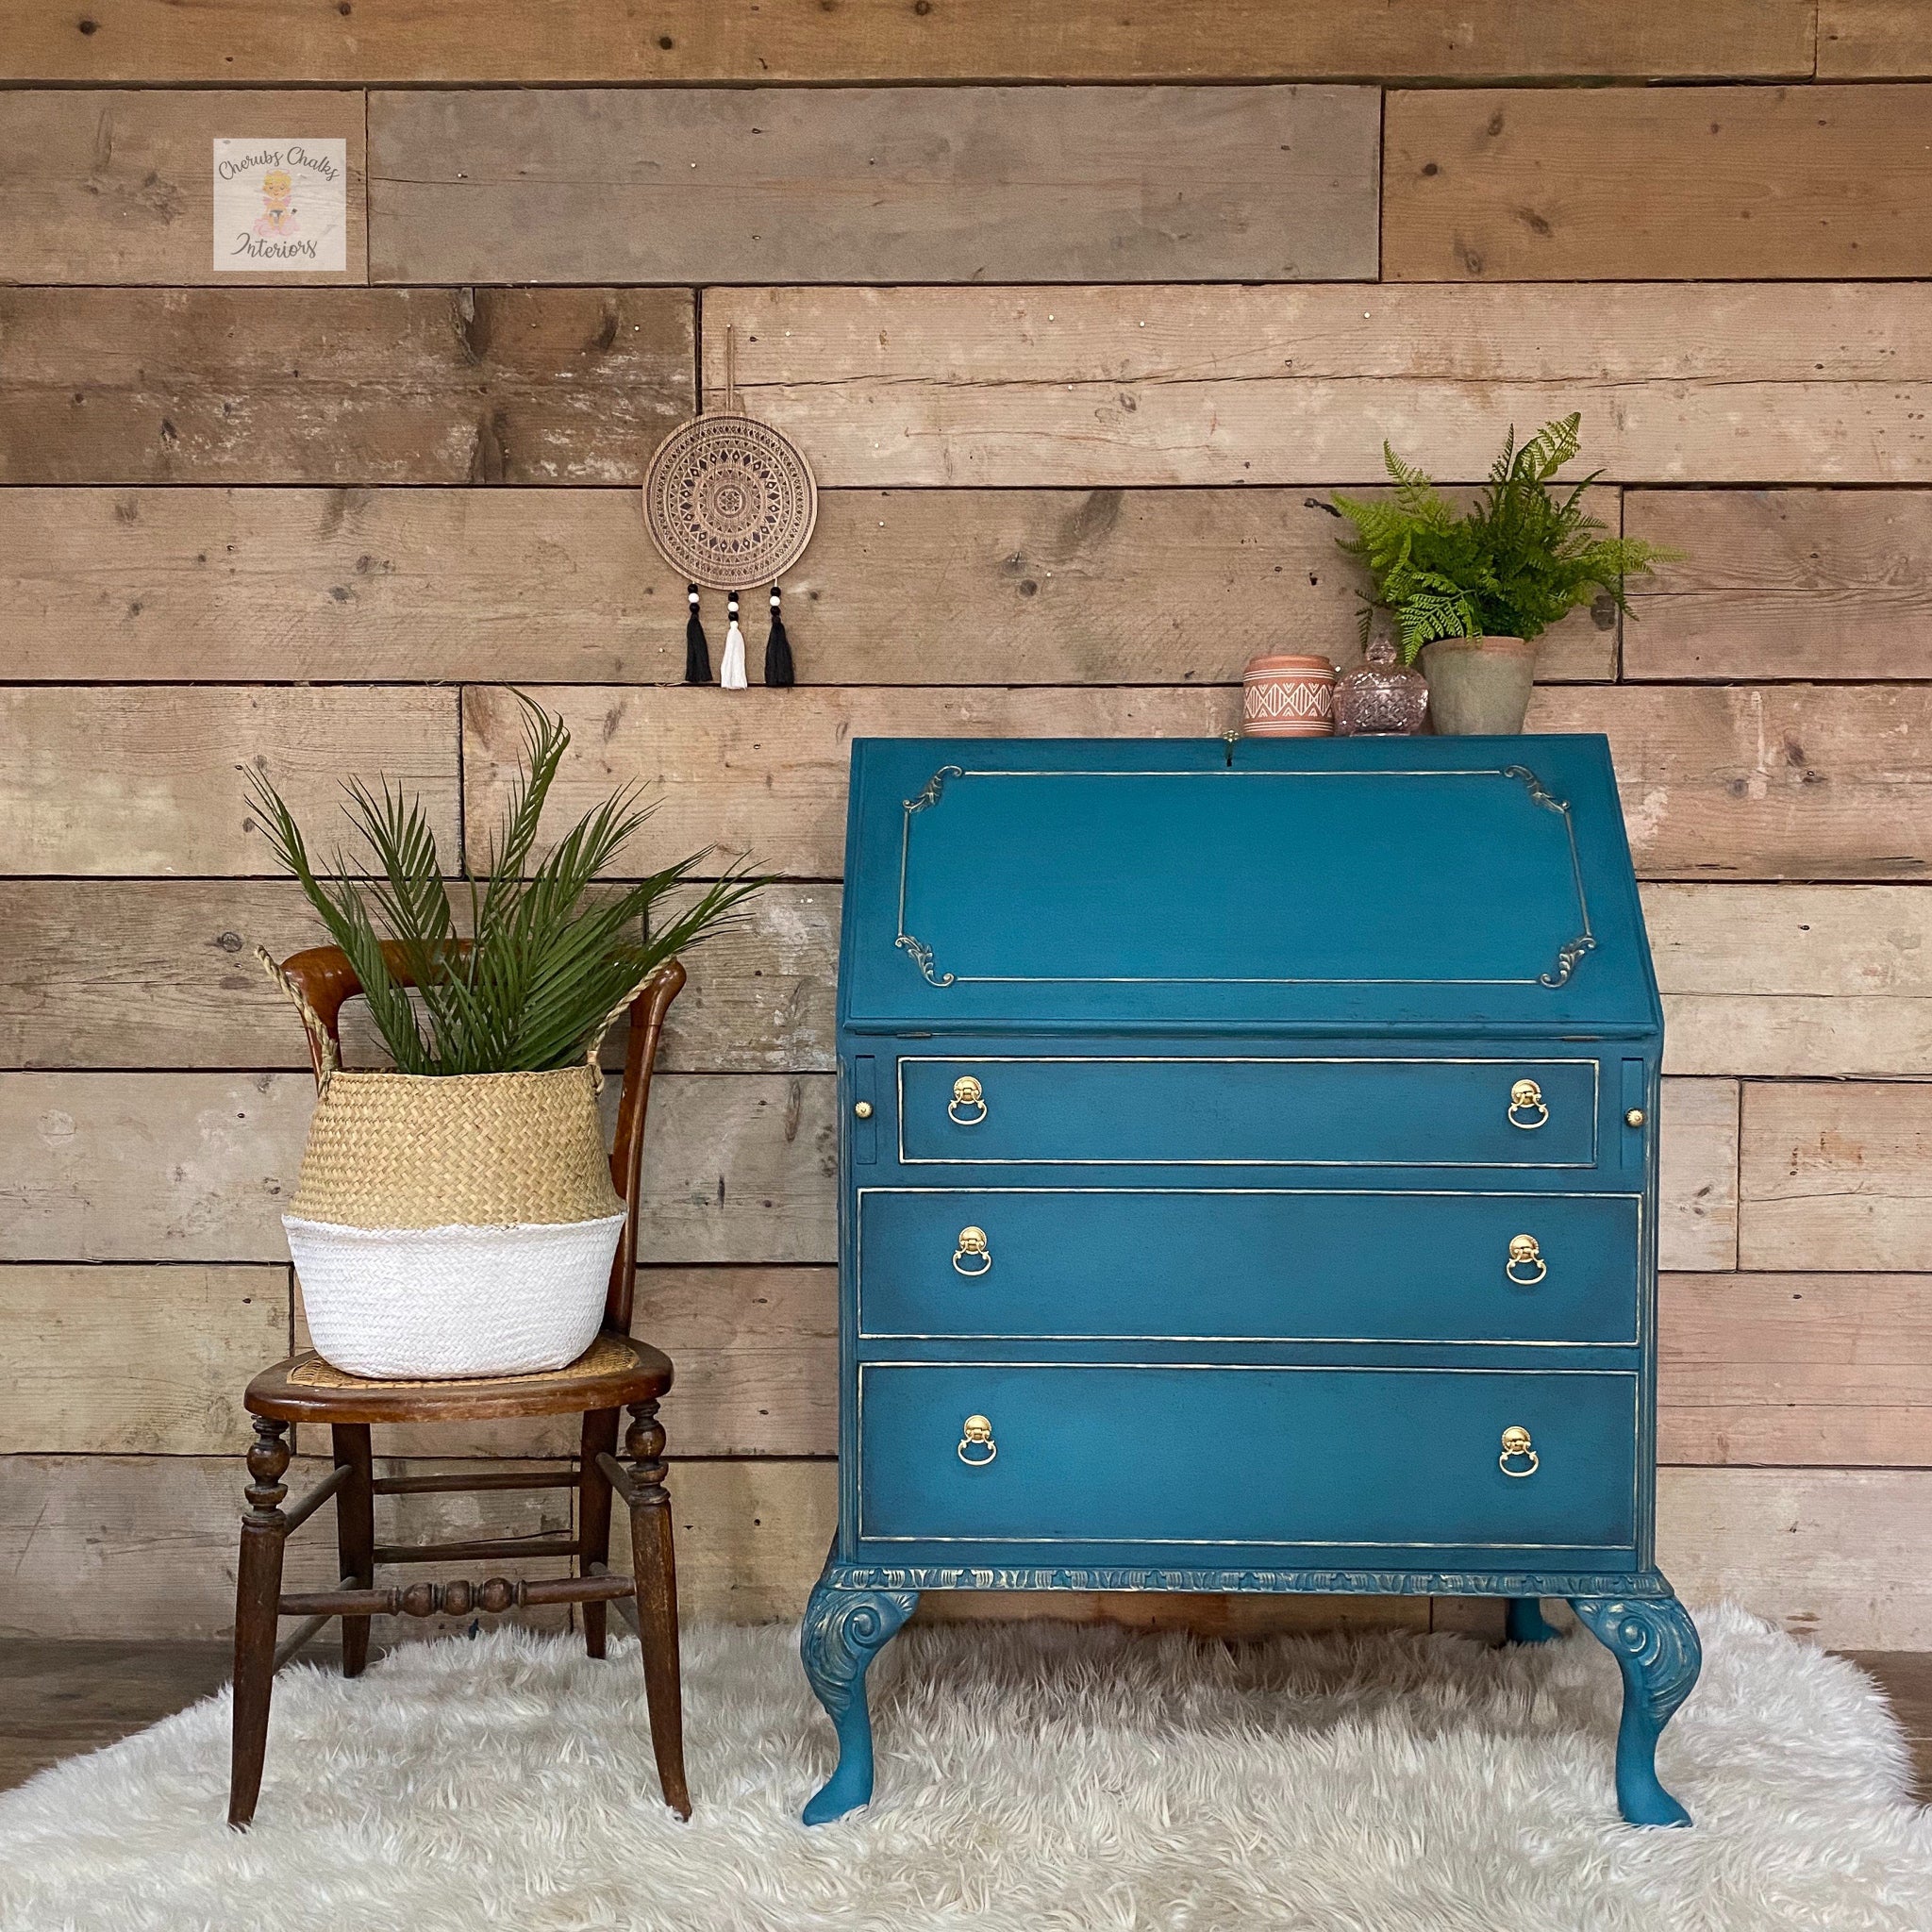 A vintage secretary's desk with gold details refurbished by Cherubs Chalks Interiors is painted in Dixie Belle's Antebellum Blue chalk mineral paint.